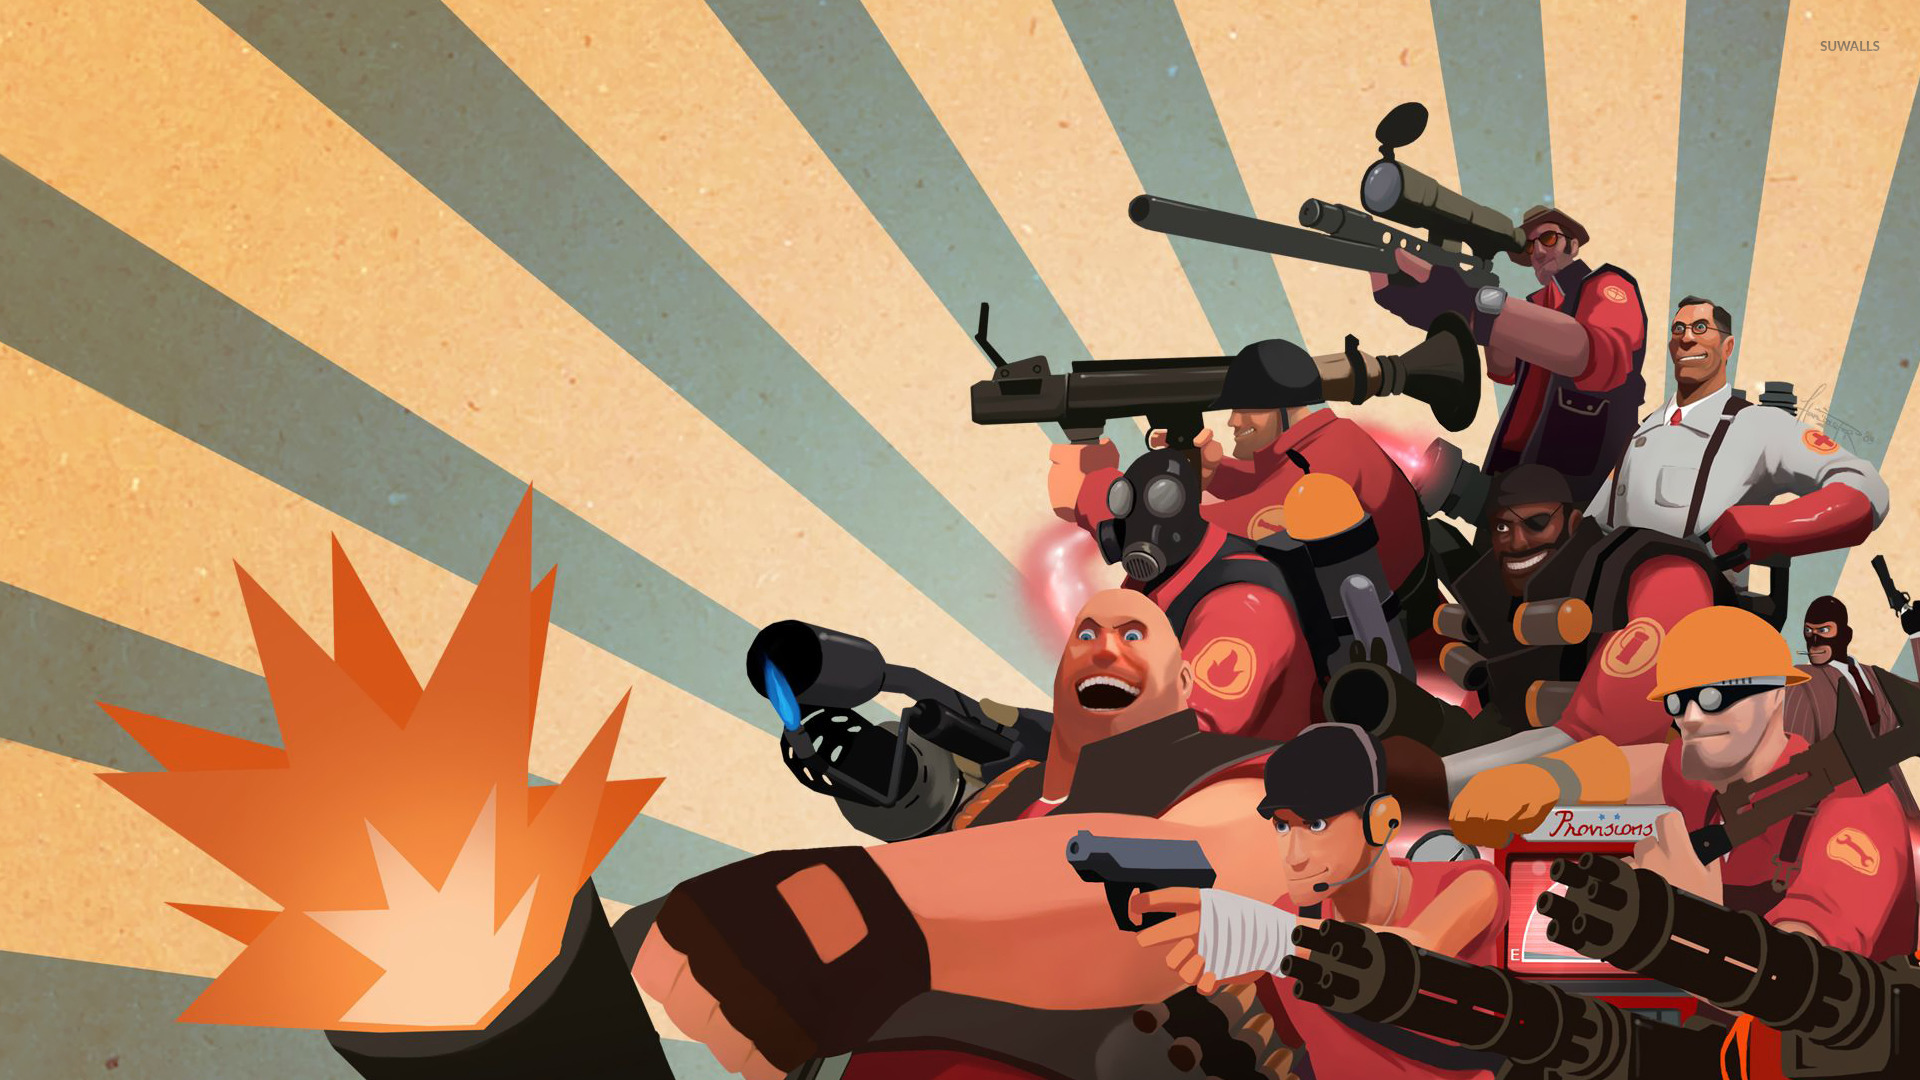 Team Fortress 2 Update is Confirmed... But There's a Catch Insider Gaming